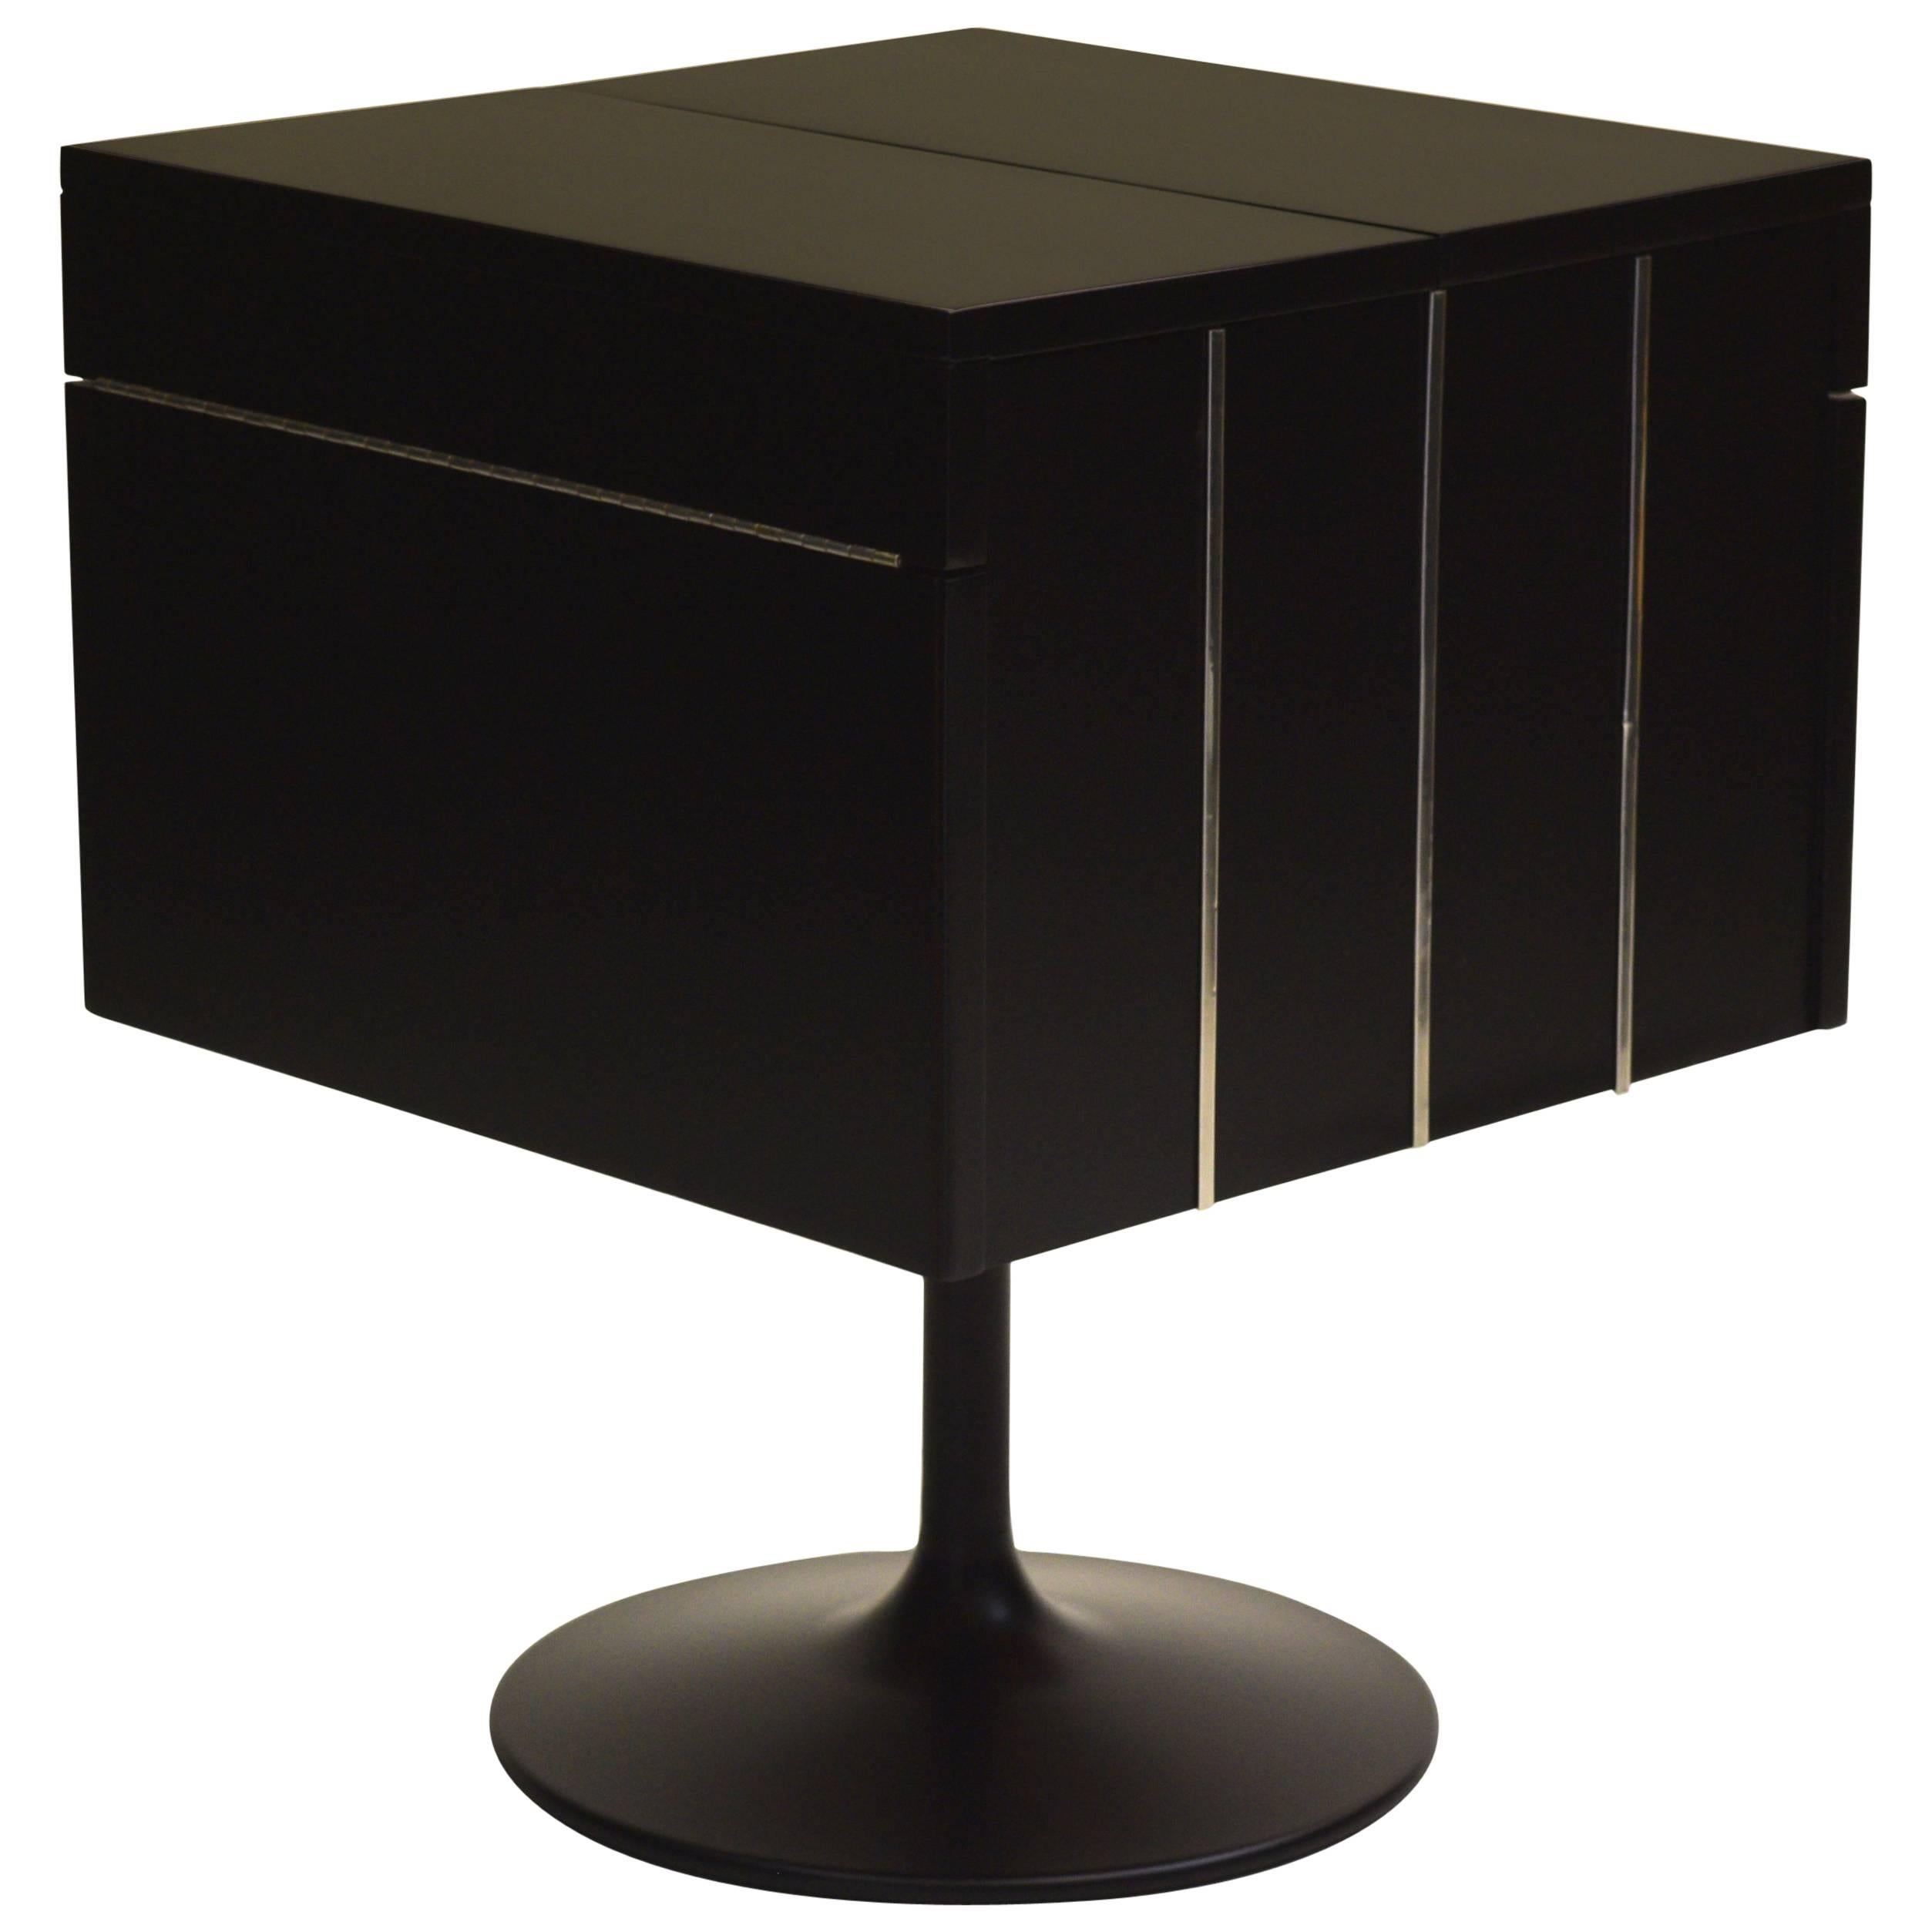 Exceptional Rotating Swivel Cocktail Dry Bar on Pedestal Base in Black Lacquer